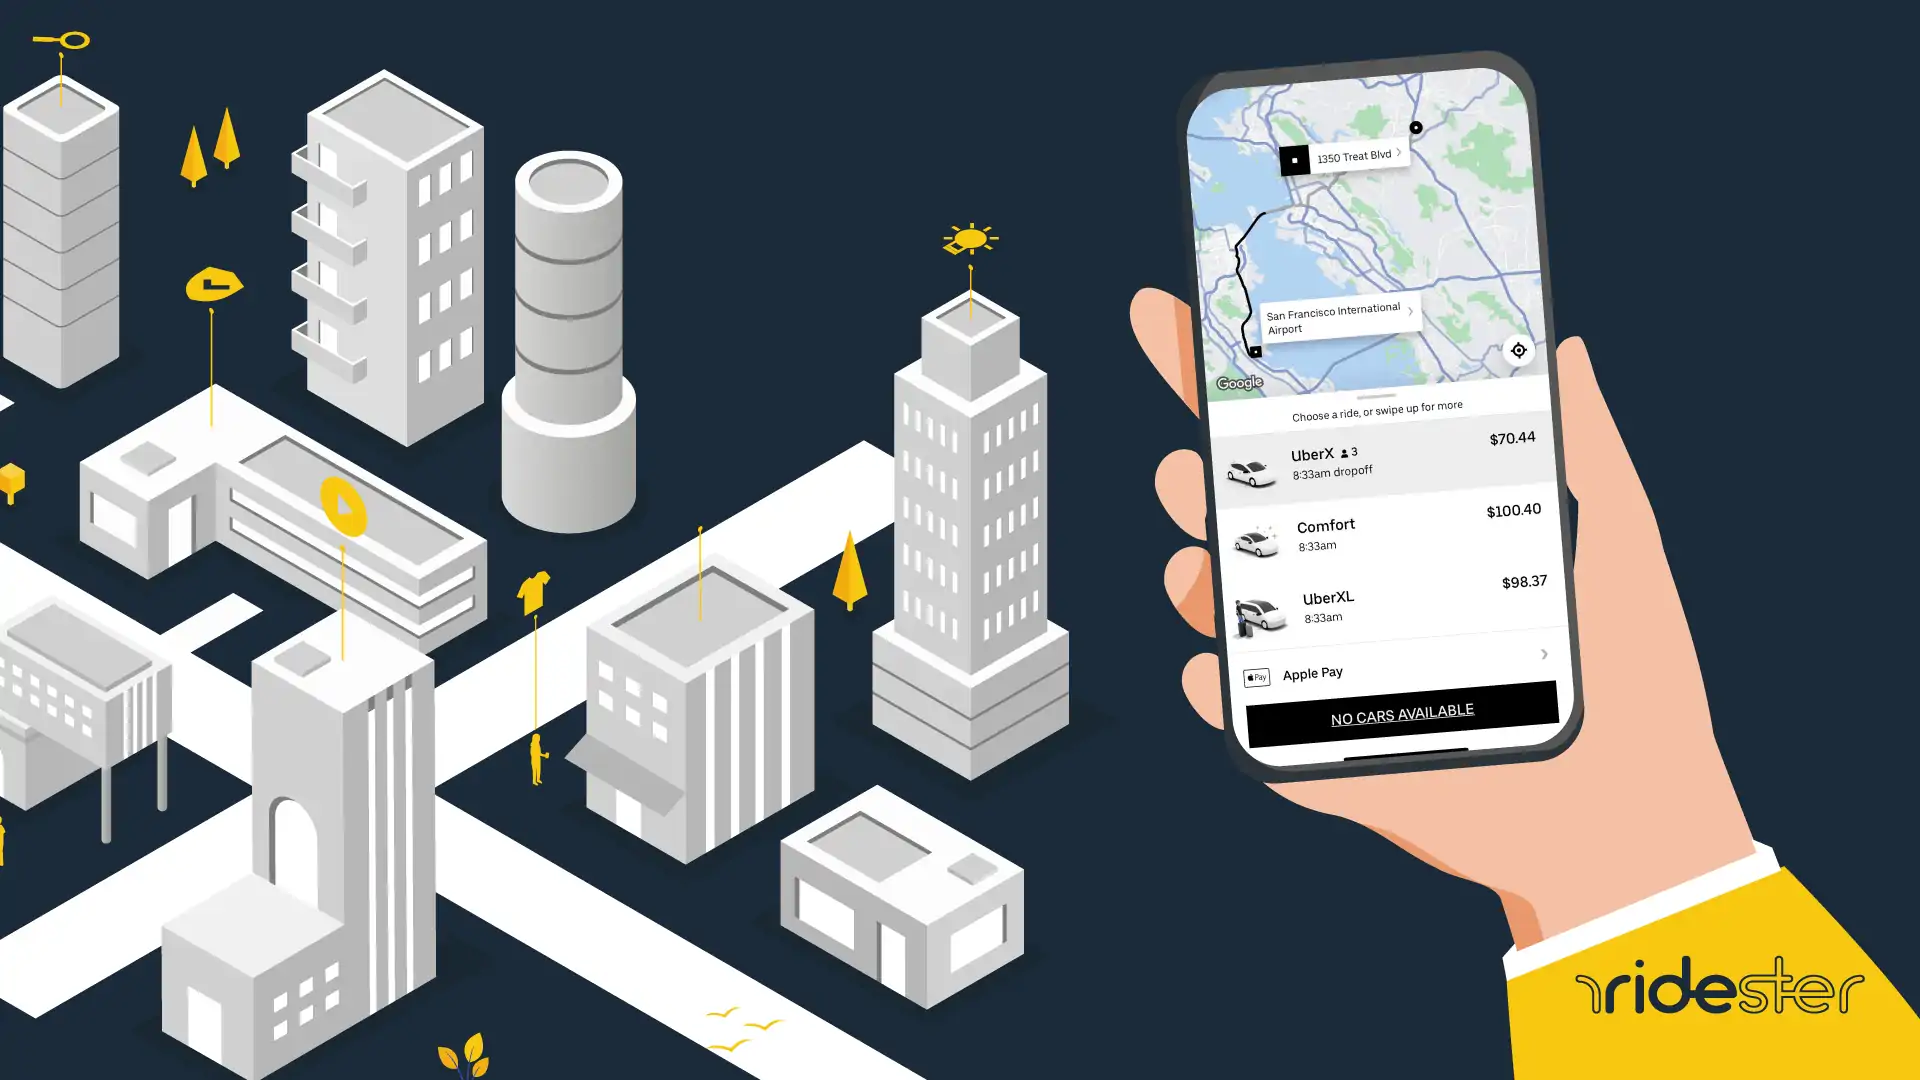 vector graphic showing a city in the background, and a hand holding a phone that displays the "uber no cars available" error message